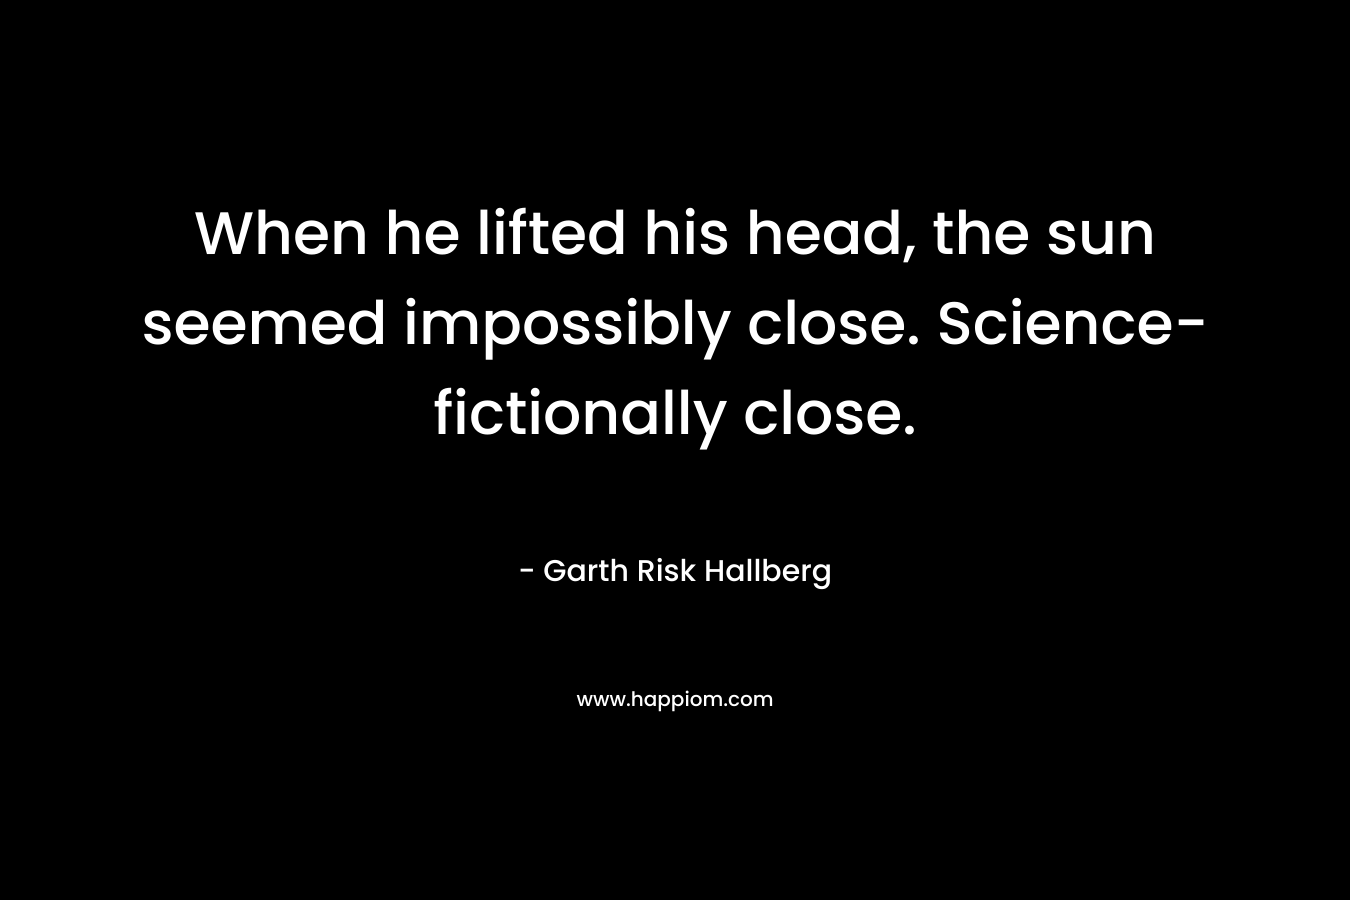 When he lifted his head, the sun seemed impossibly close. Science-fictionally close.